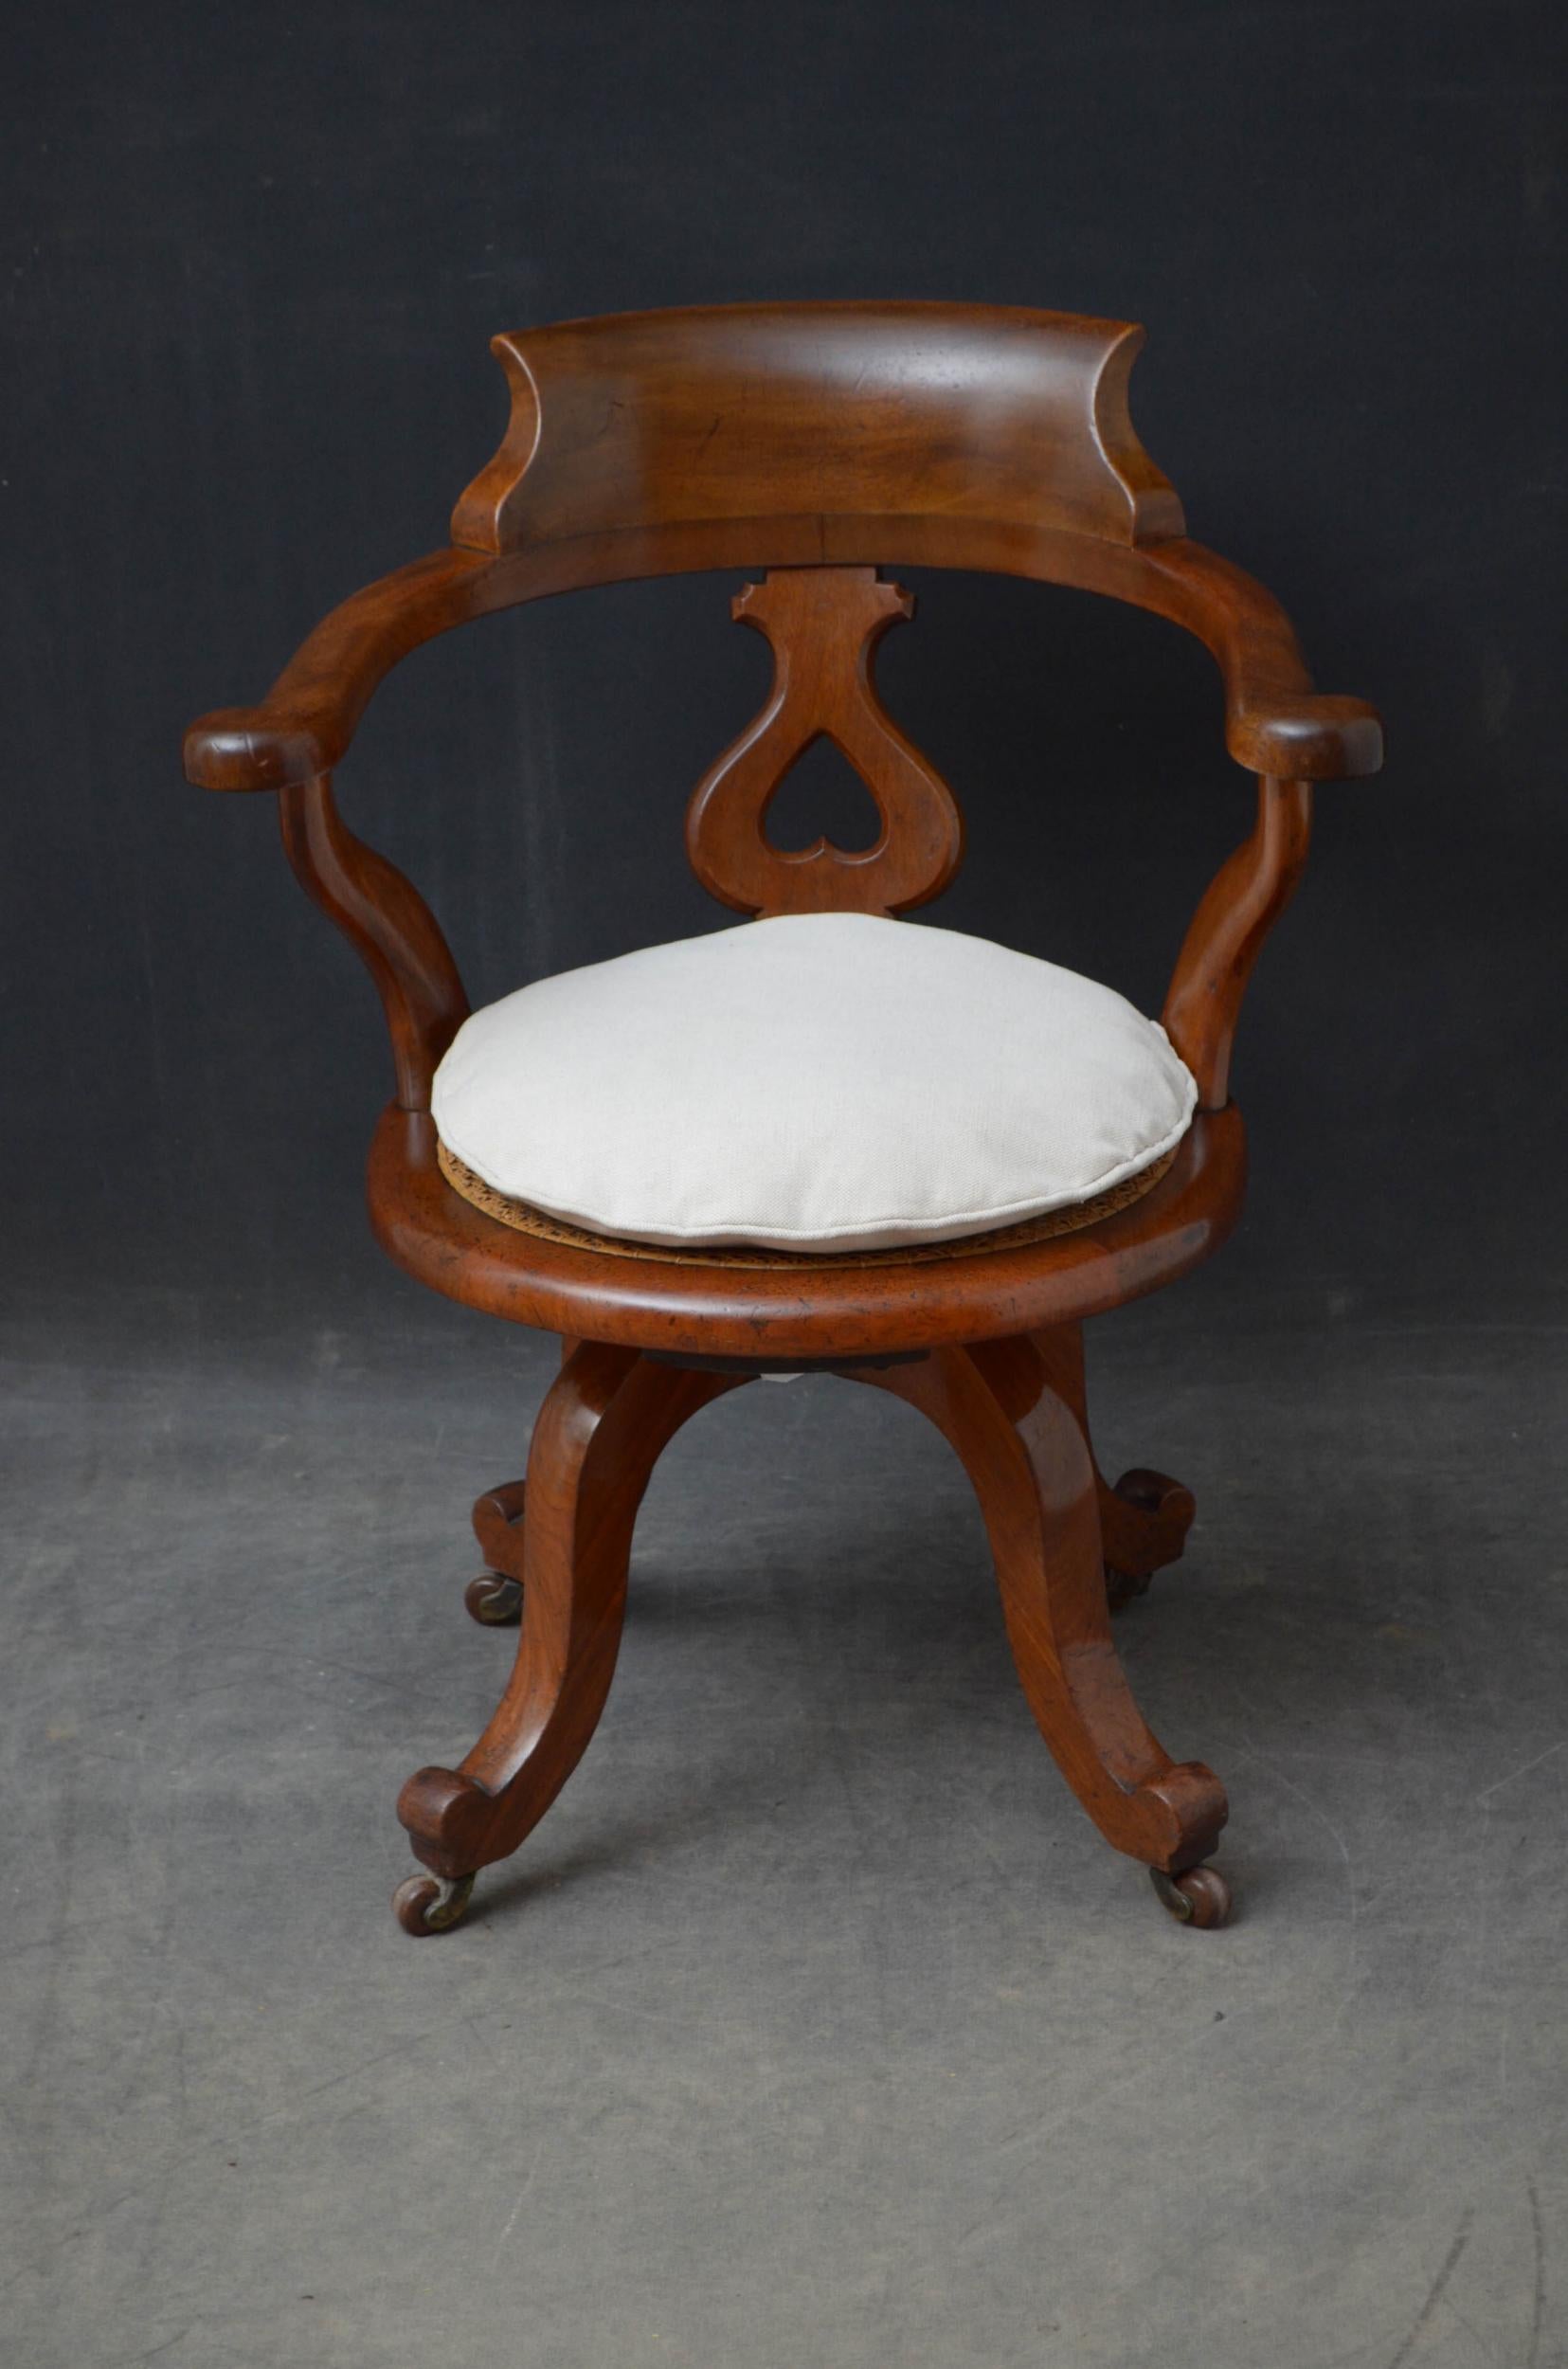 Sn5032 Victorian, mahogany, swivel desk chair, having shaped back rail with a carved splat below and a caned seat with a new cushion flanked by outswept, pad arms, all standing on cabriole legs terminating in original castors. This antique desk